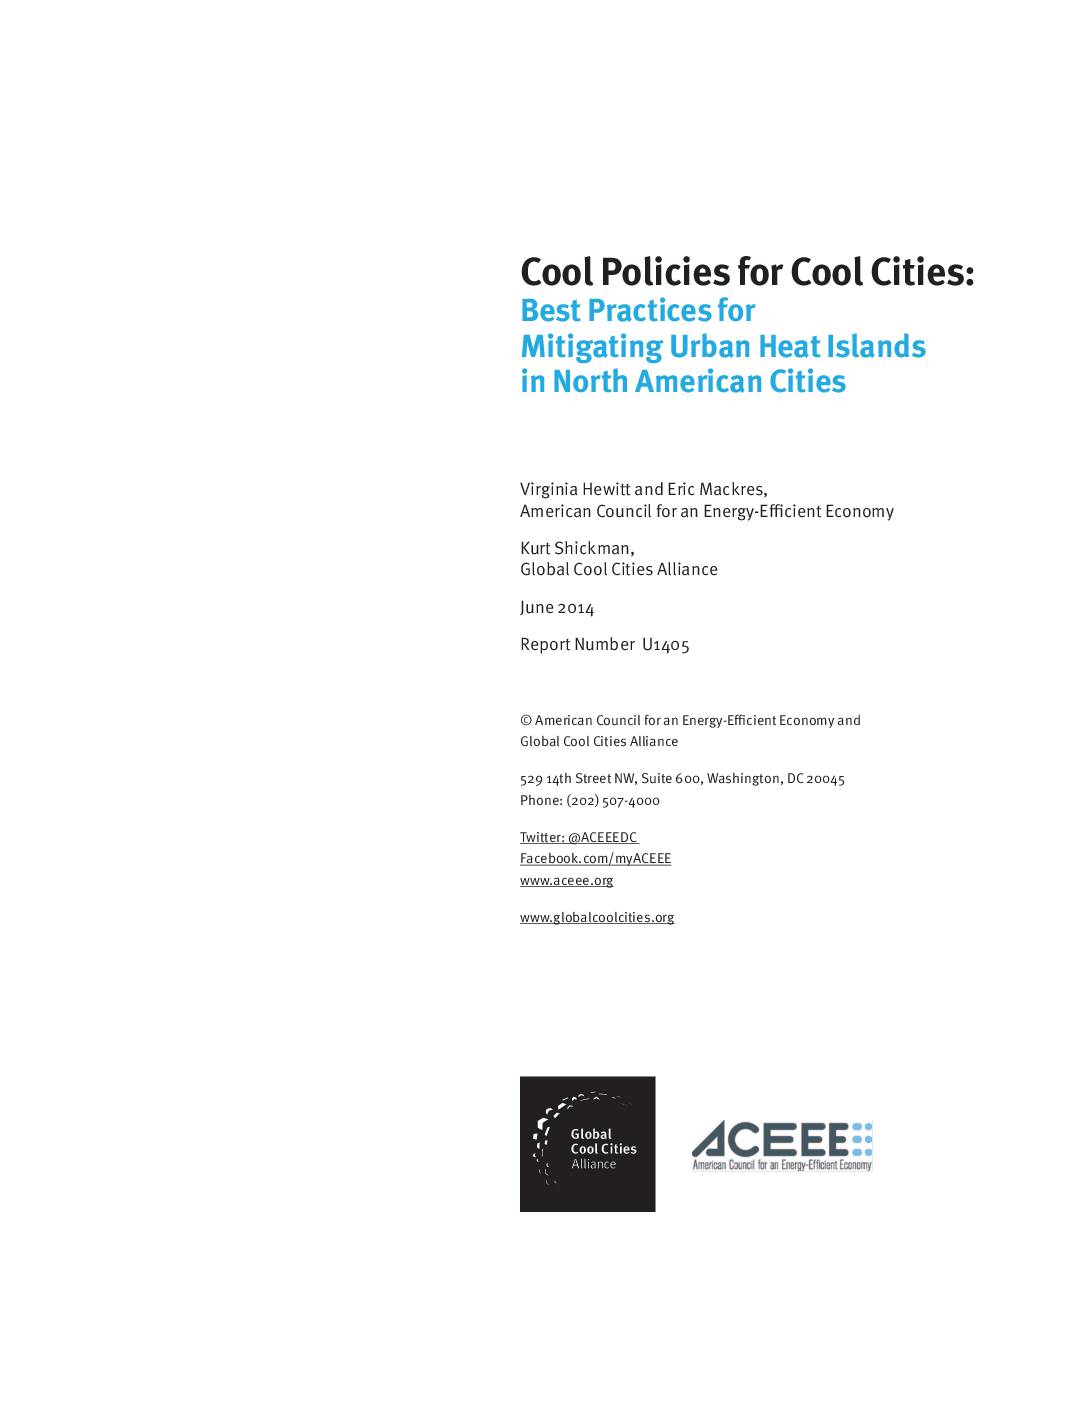 Cool Policies for Cool Cities: Best Practices for Mitigating Urban Heat Islands in North American Cities